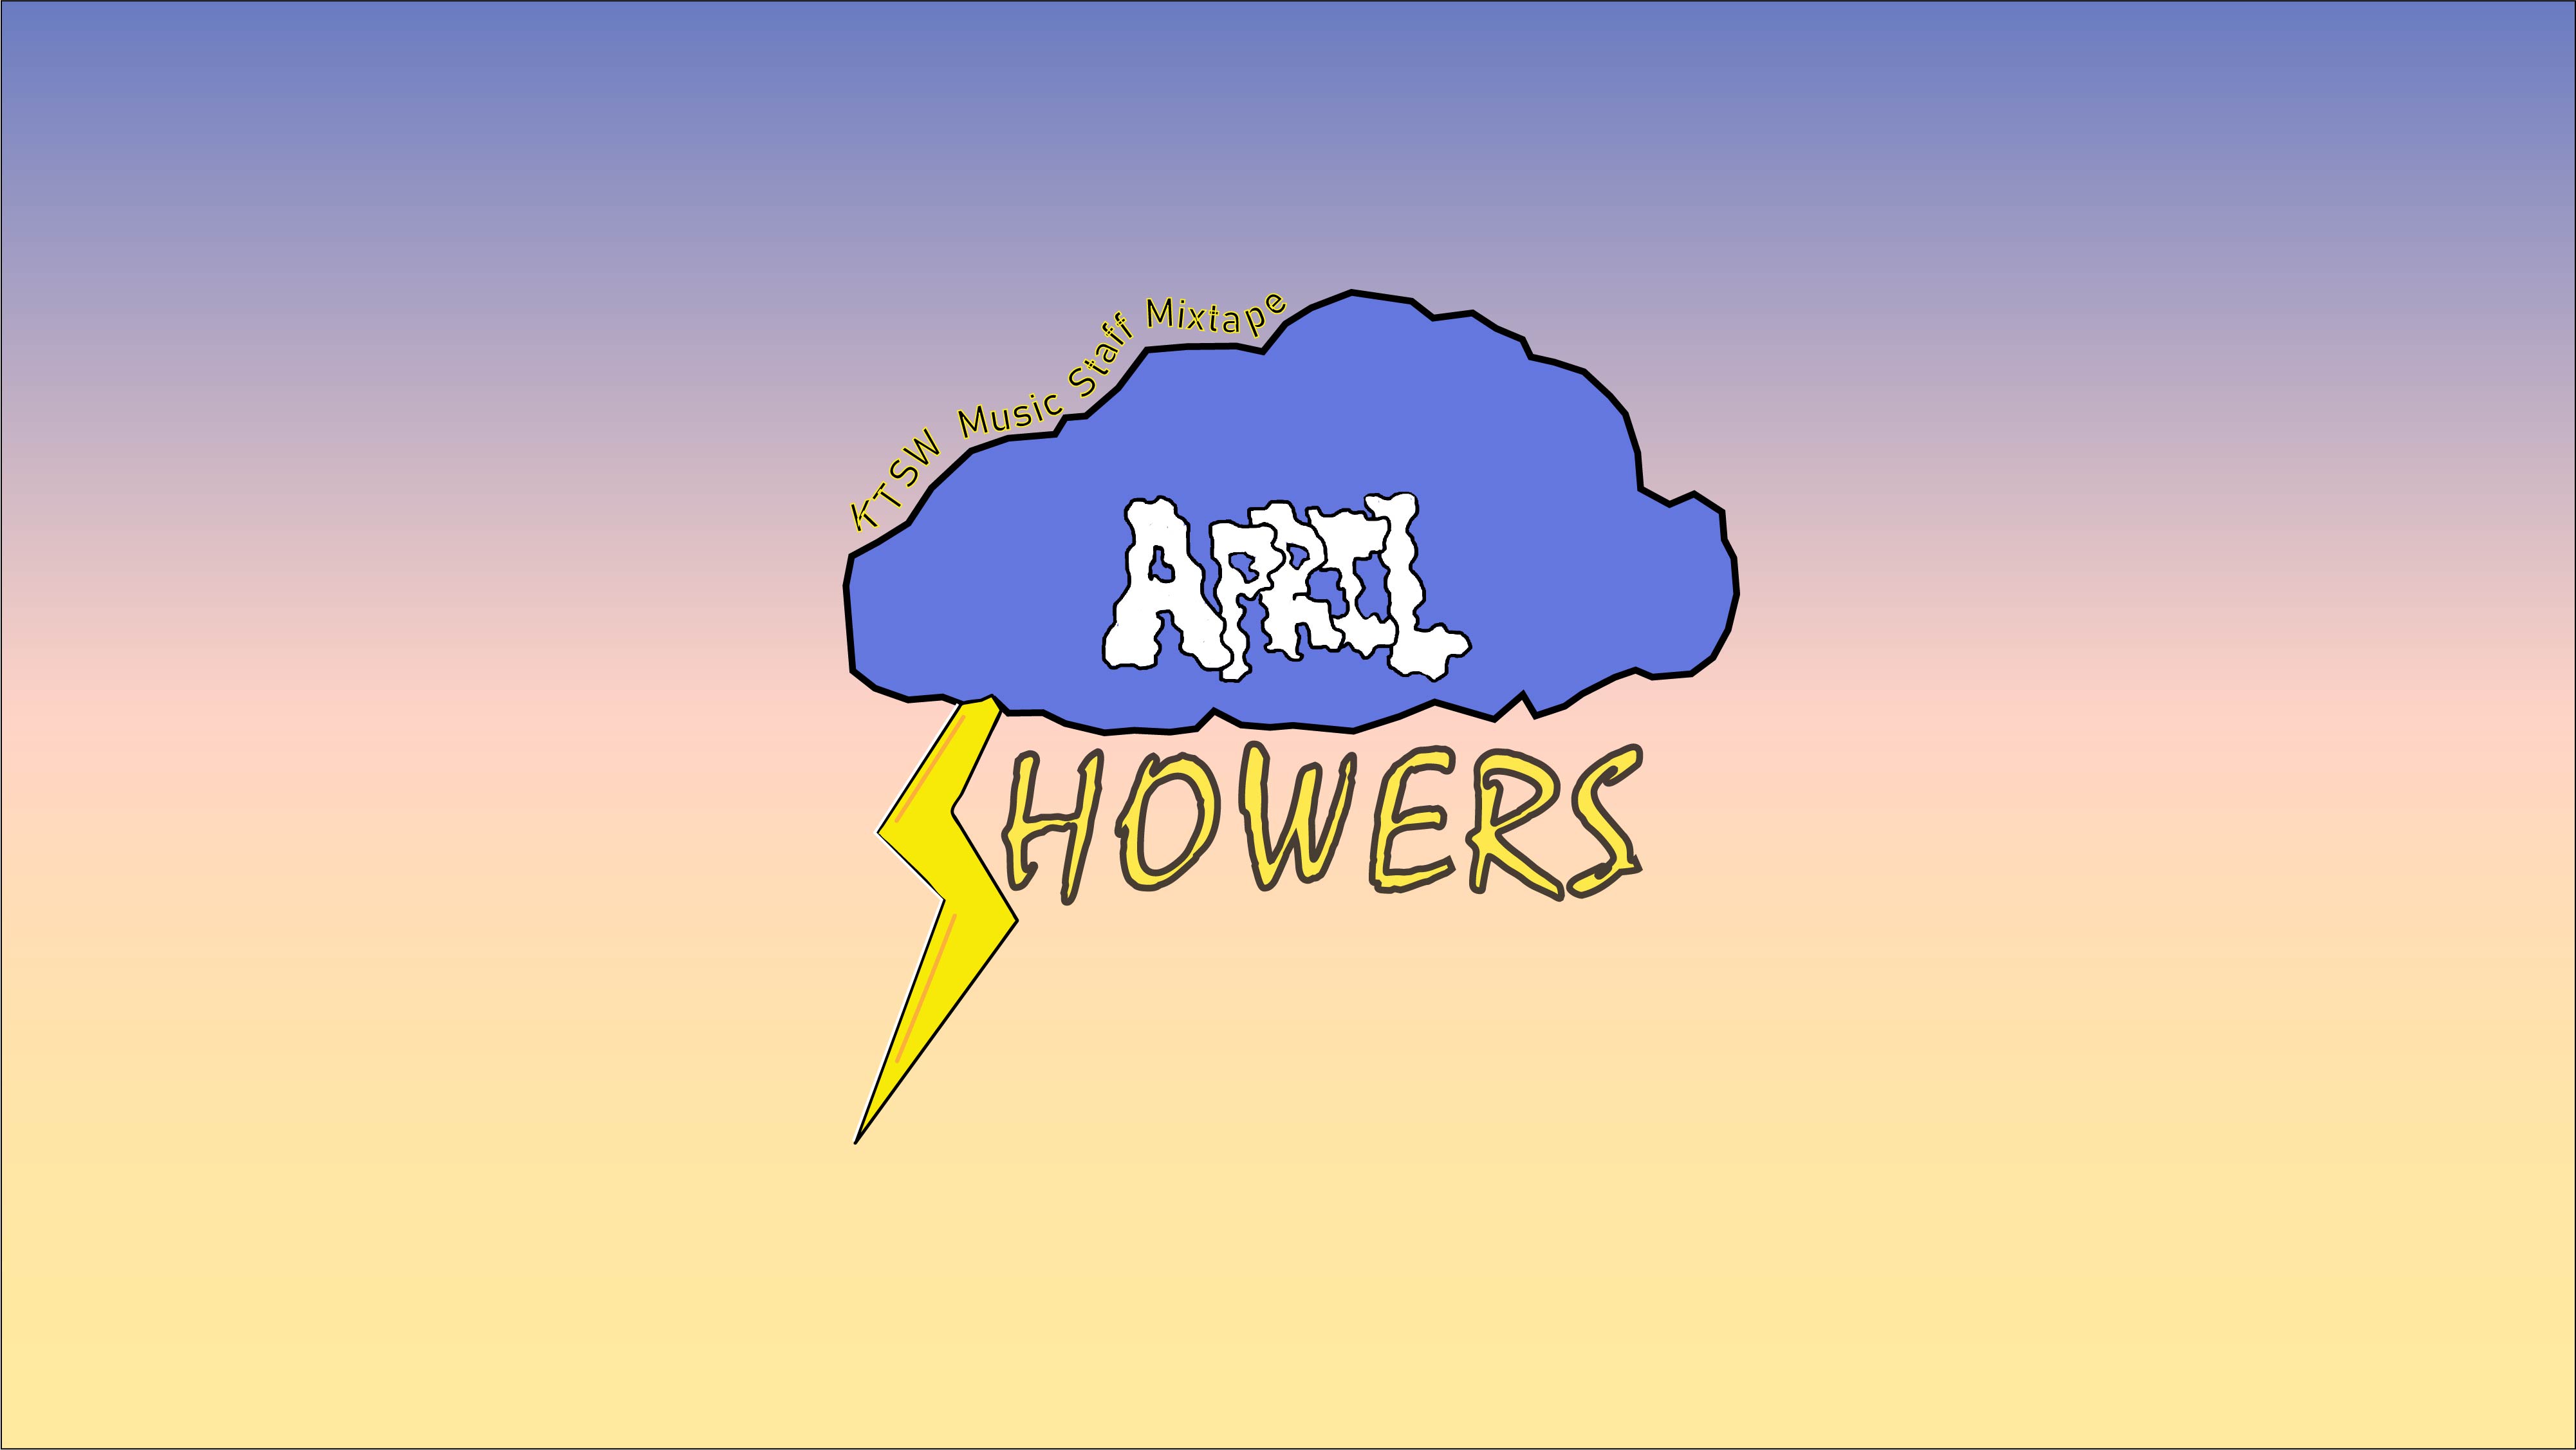 A storm cloud with the phrase “KTSW Music Staff Mixtape” around the top left with the “April Showers” beneath on sunset gradient background